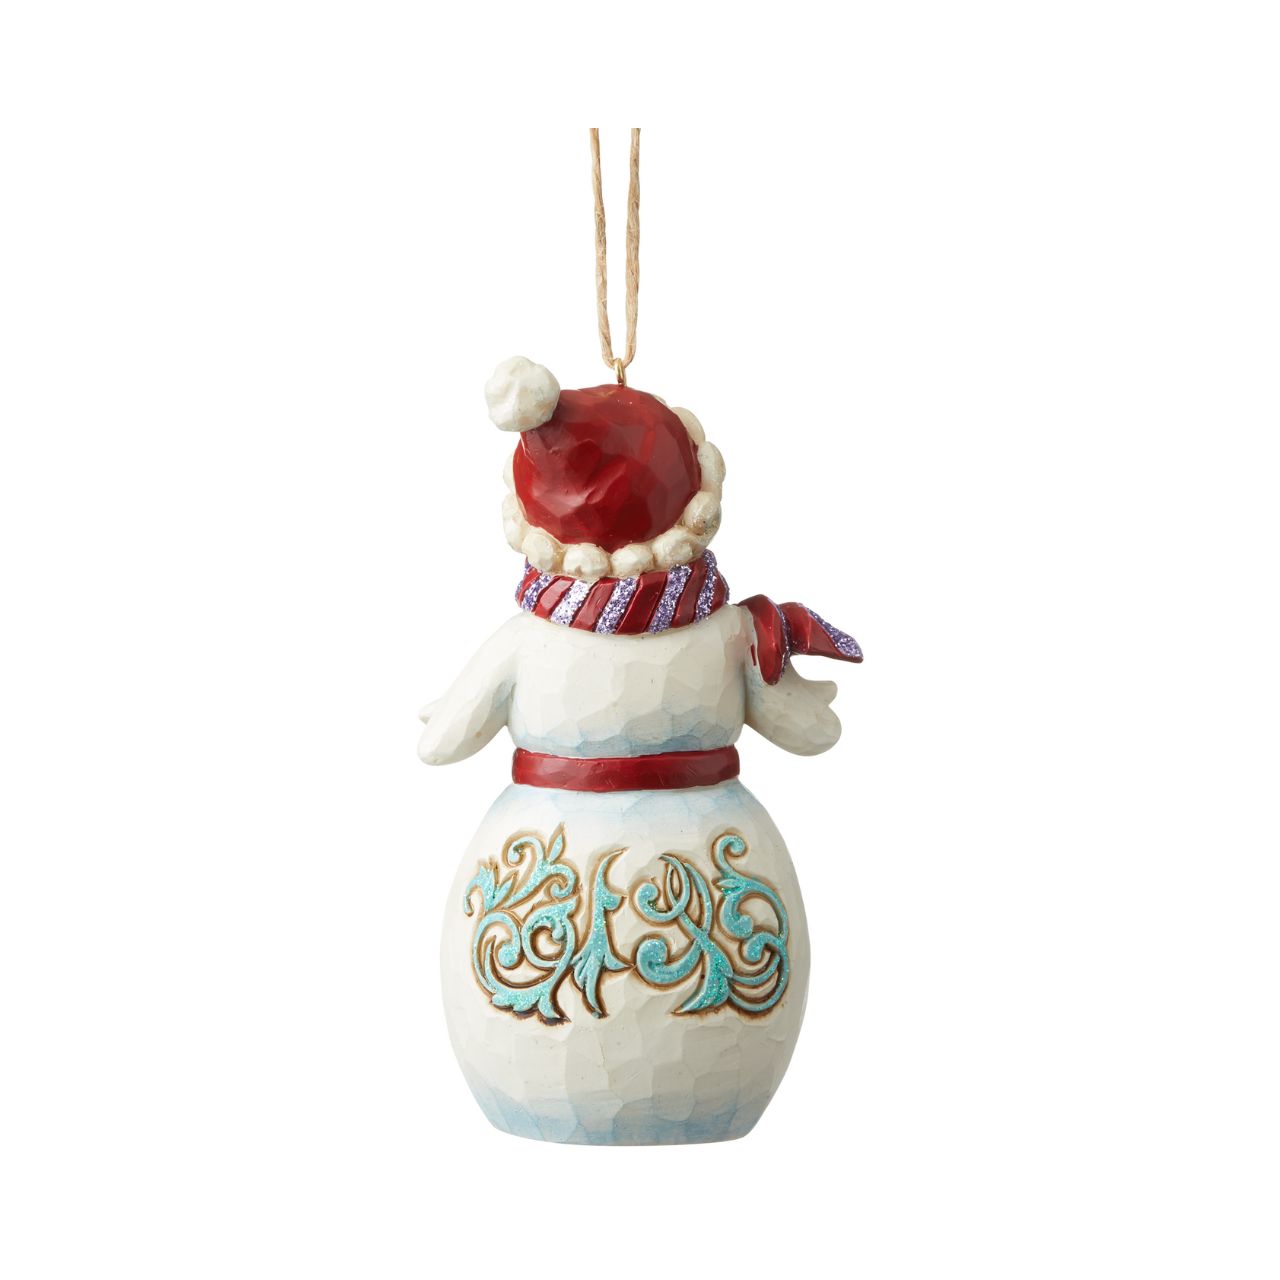 Heartwood Creek Winter Wonderland Snowman Hanging Ornament  Jim Shore's Winter Wonderland collection features a subtle glitter finish with Jim's signature colour and intricate design. This whimsical holiday Snowman ornament with knit cap and scarf is strikingly decorated with a bold blue rosemaling motif.